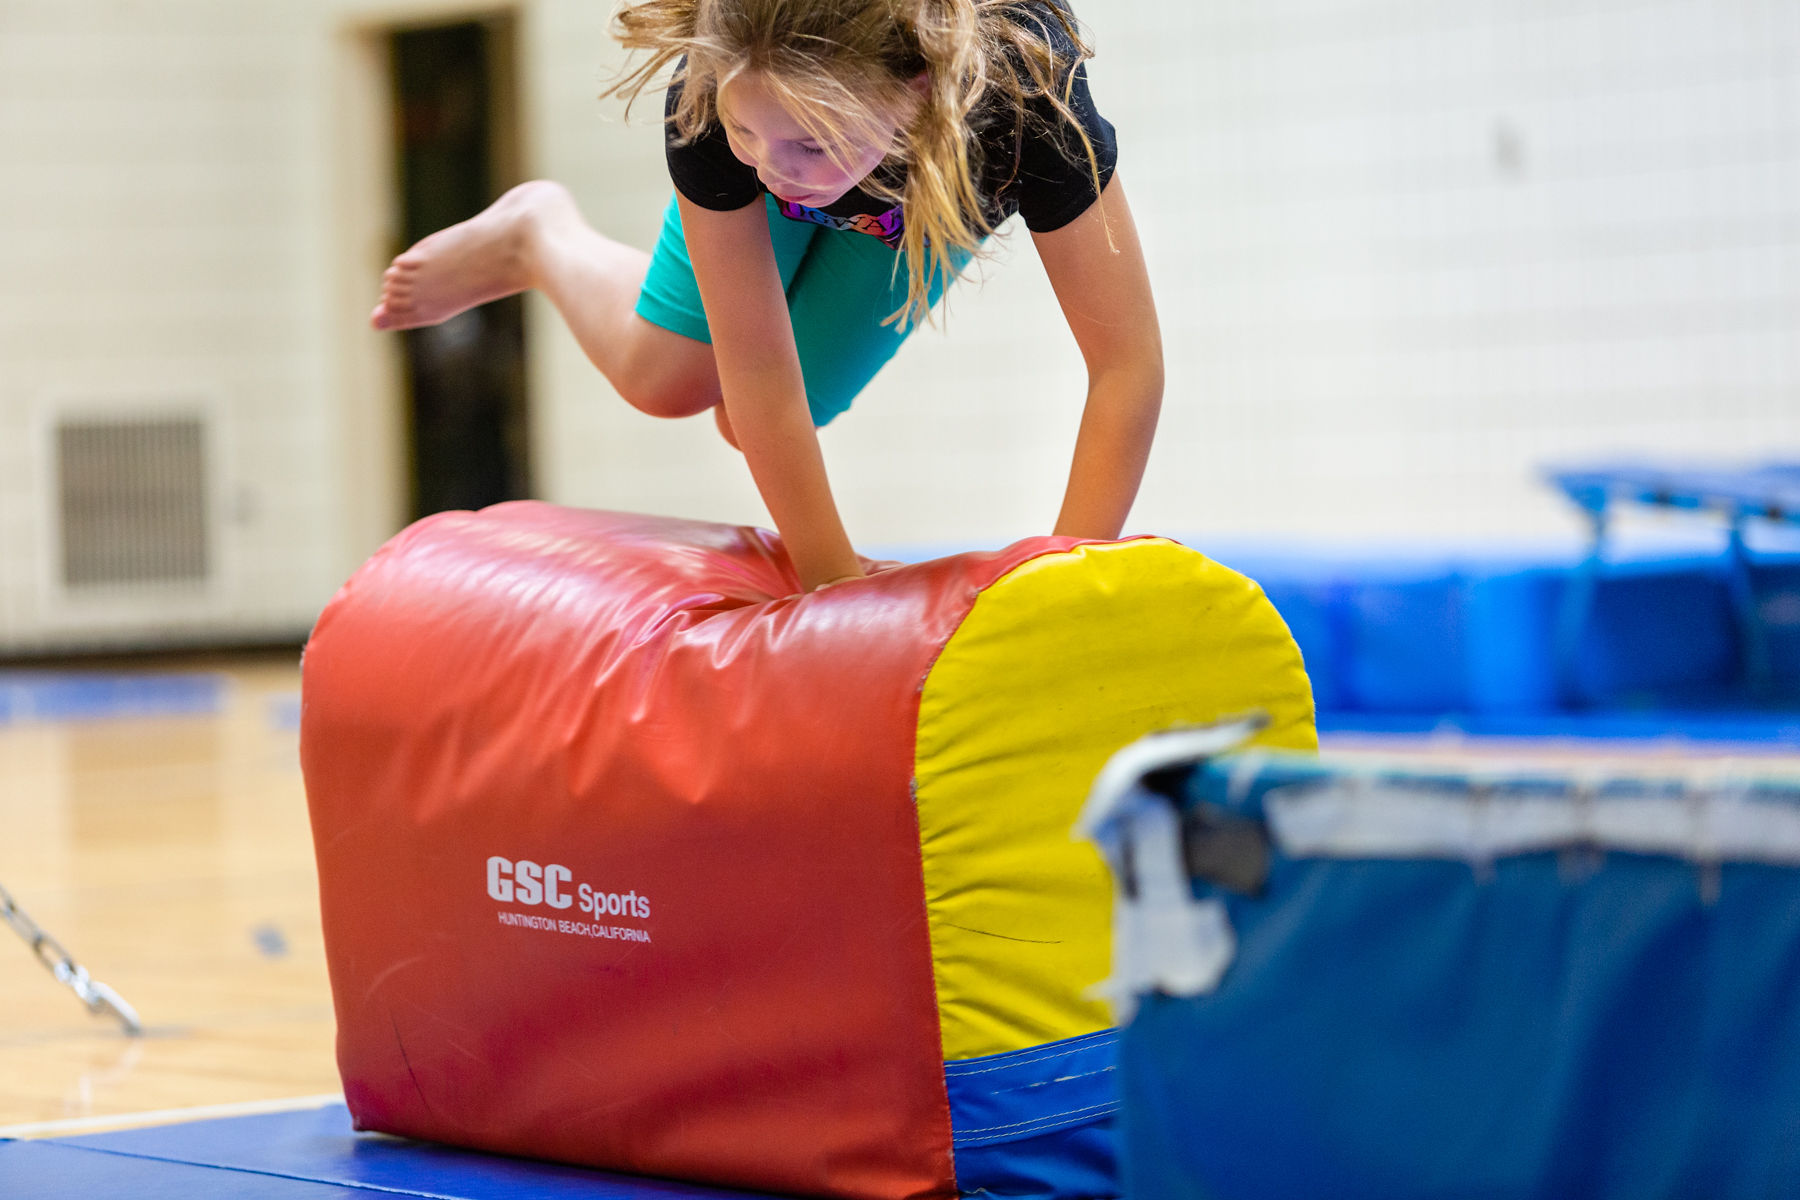 Active child jumping over colorful obstacle, while participating in Fit Kidz youth program.